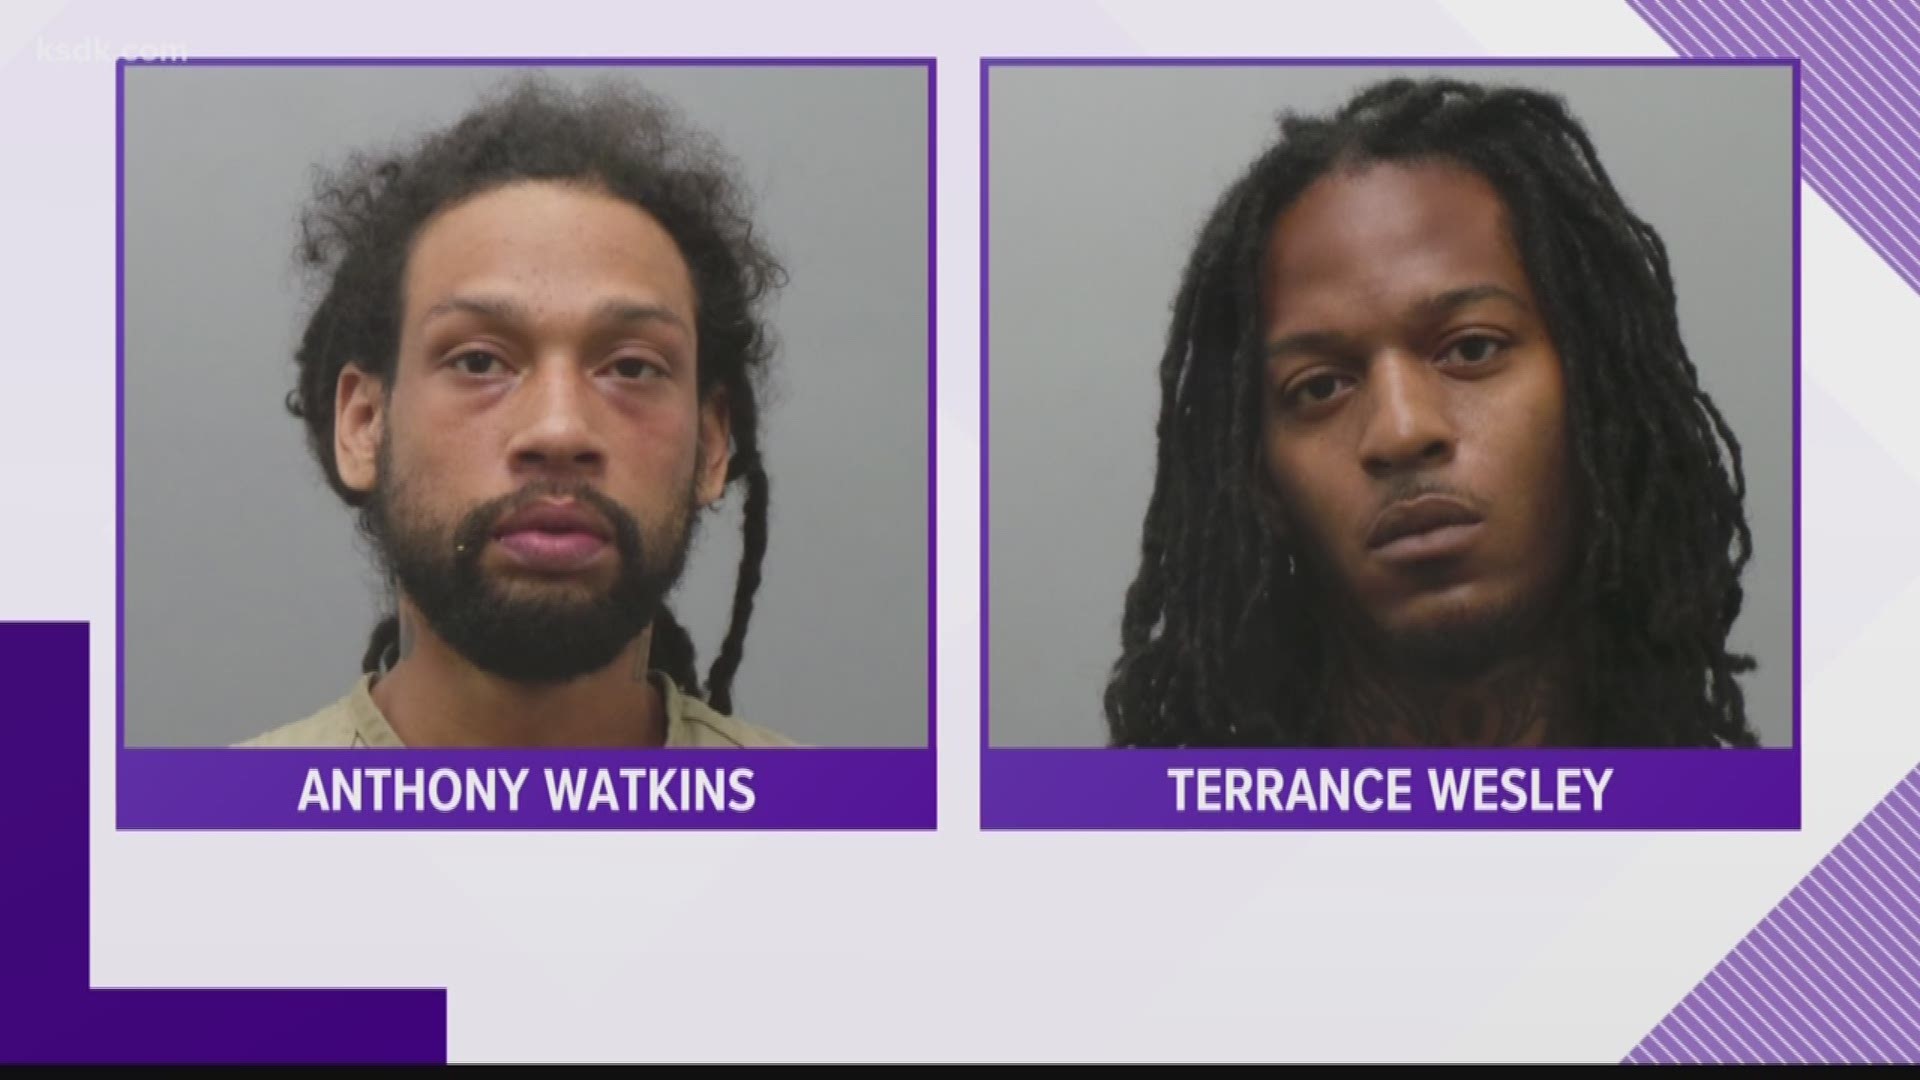 Both men are facing 20 counts in connection with the quintuple homicide over the weekend.